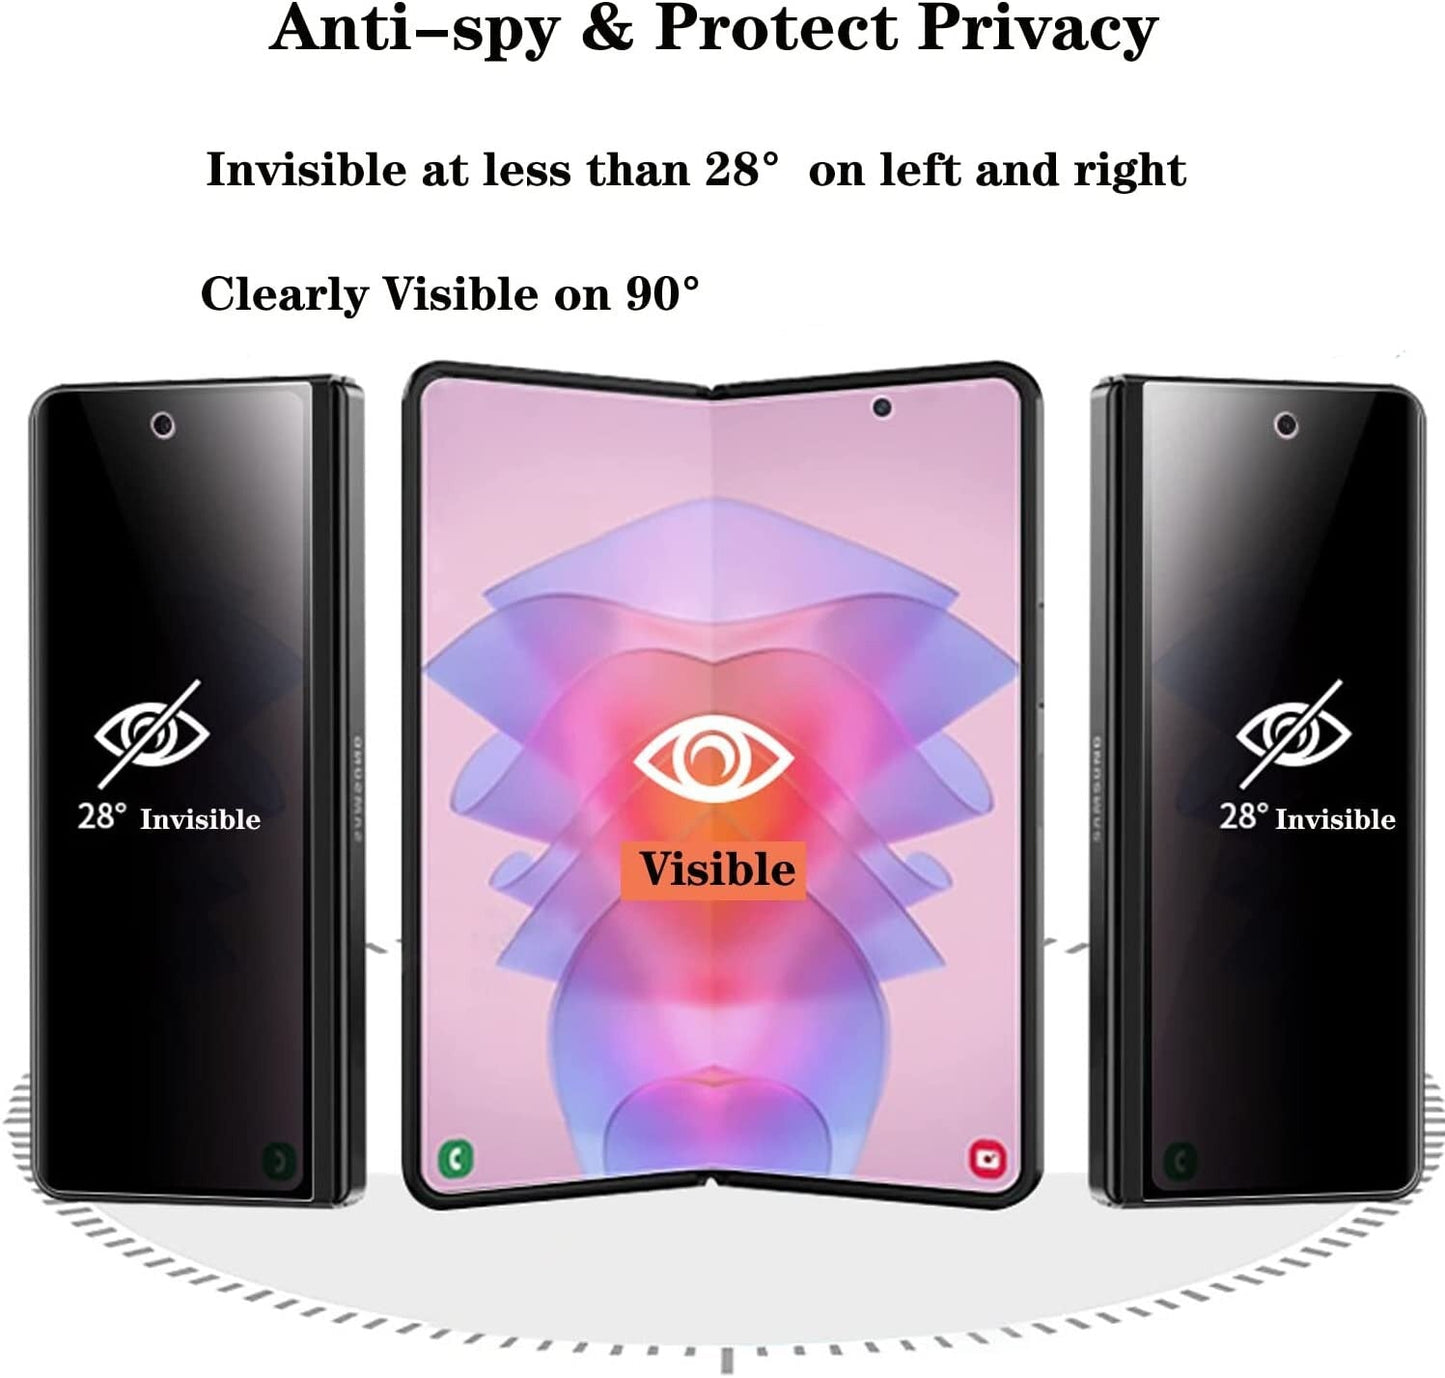 Anti-Peeping Front & Back Screen Privacy Protector - ZFOLD Series